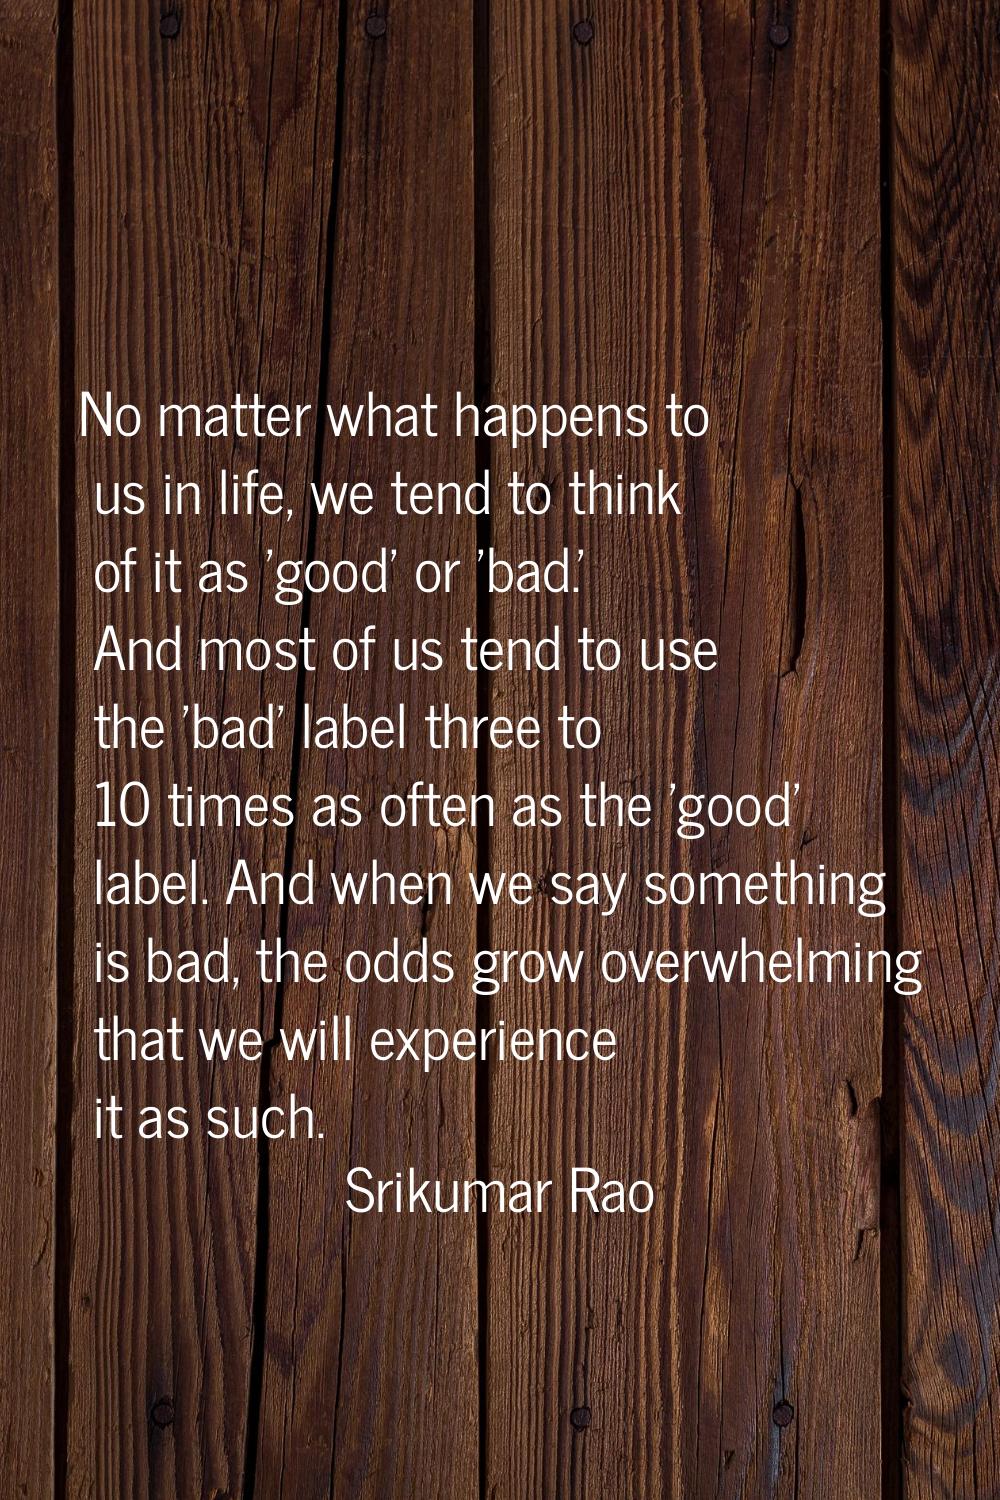 No matter what happens to us in life, we tend to think of it as 'good' or 'bad.' And most of us ten